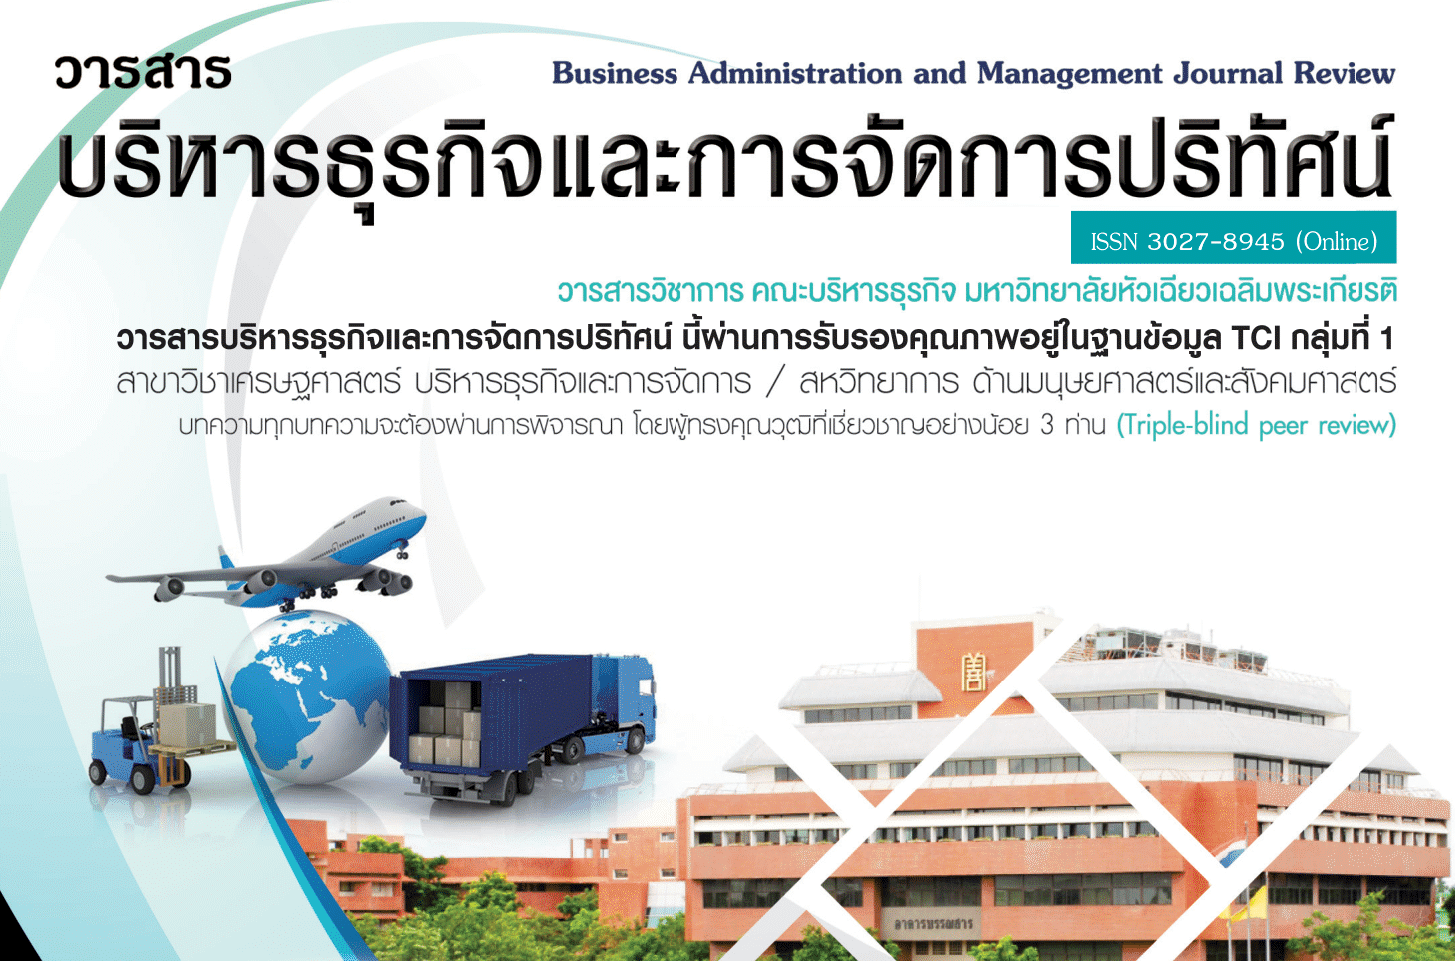 Business Administration and Management Journal Review